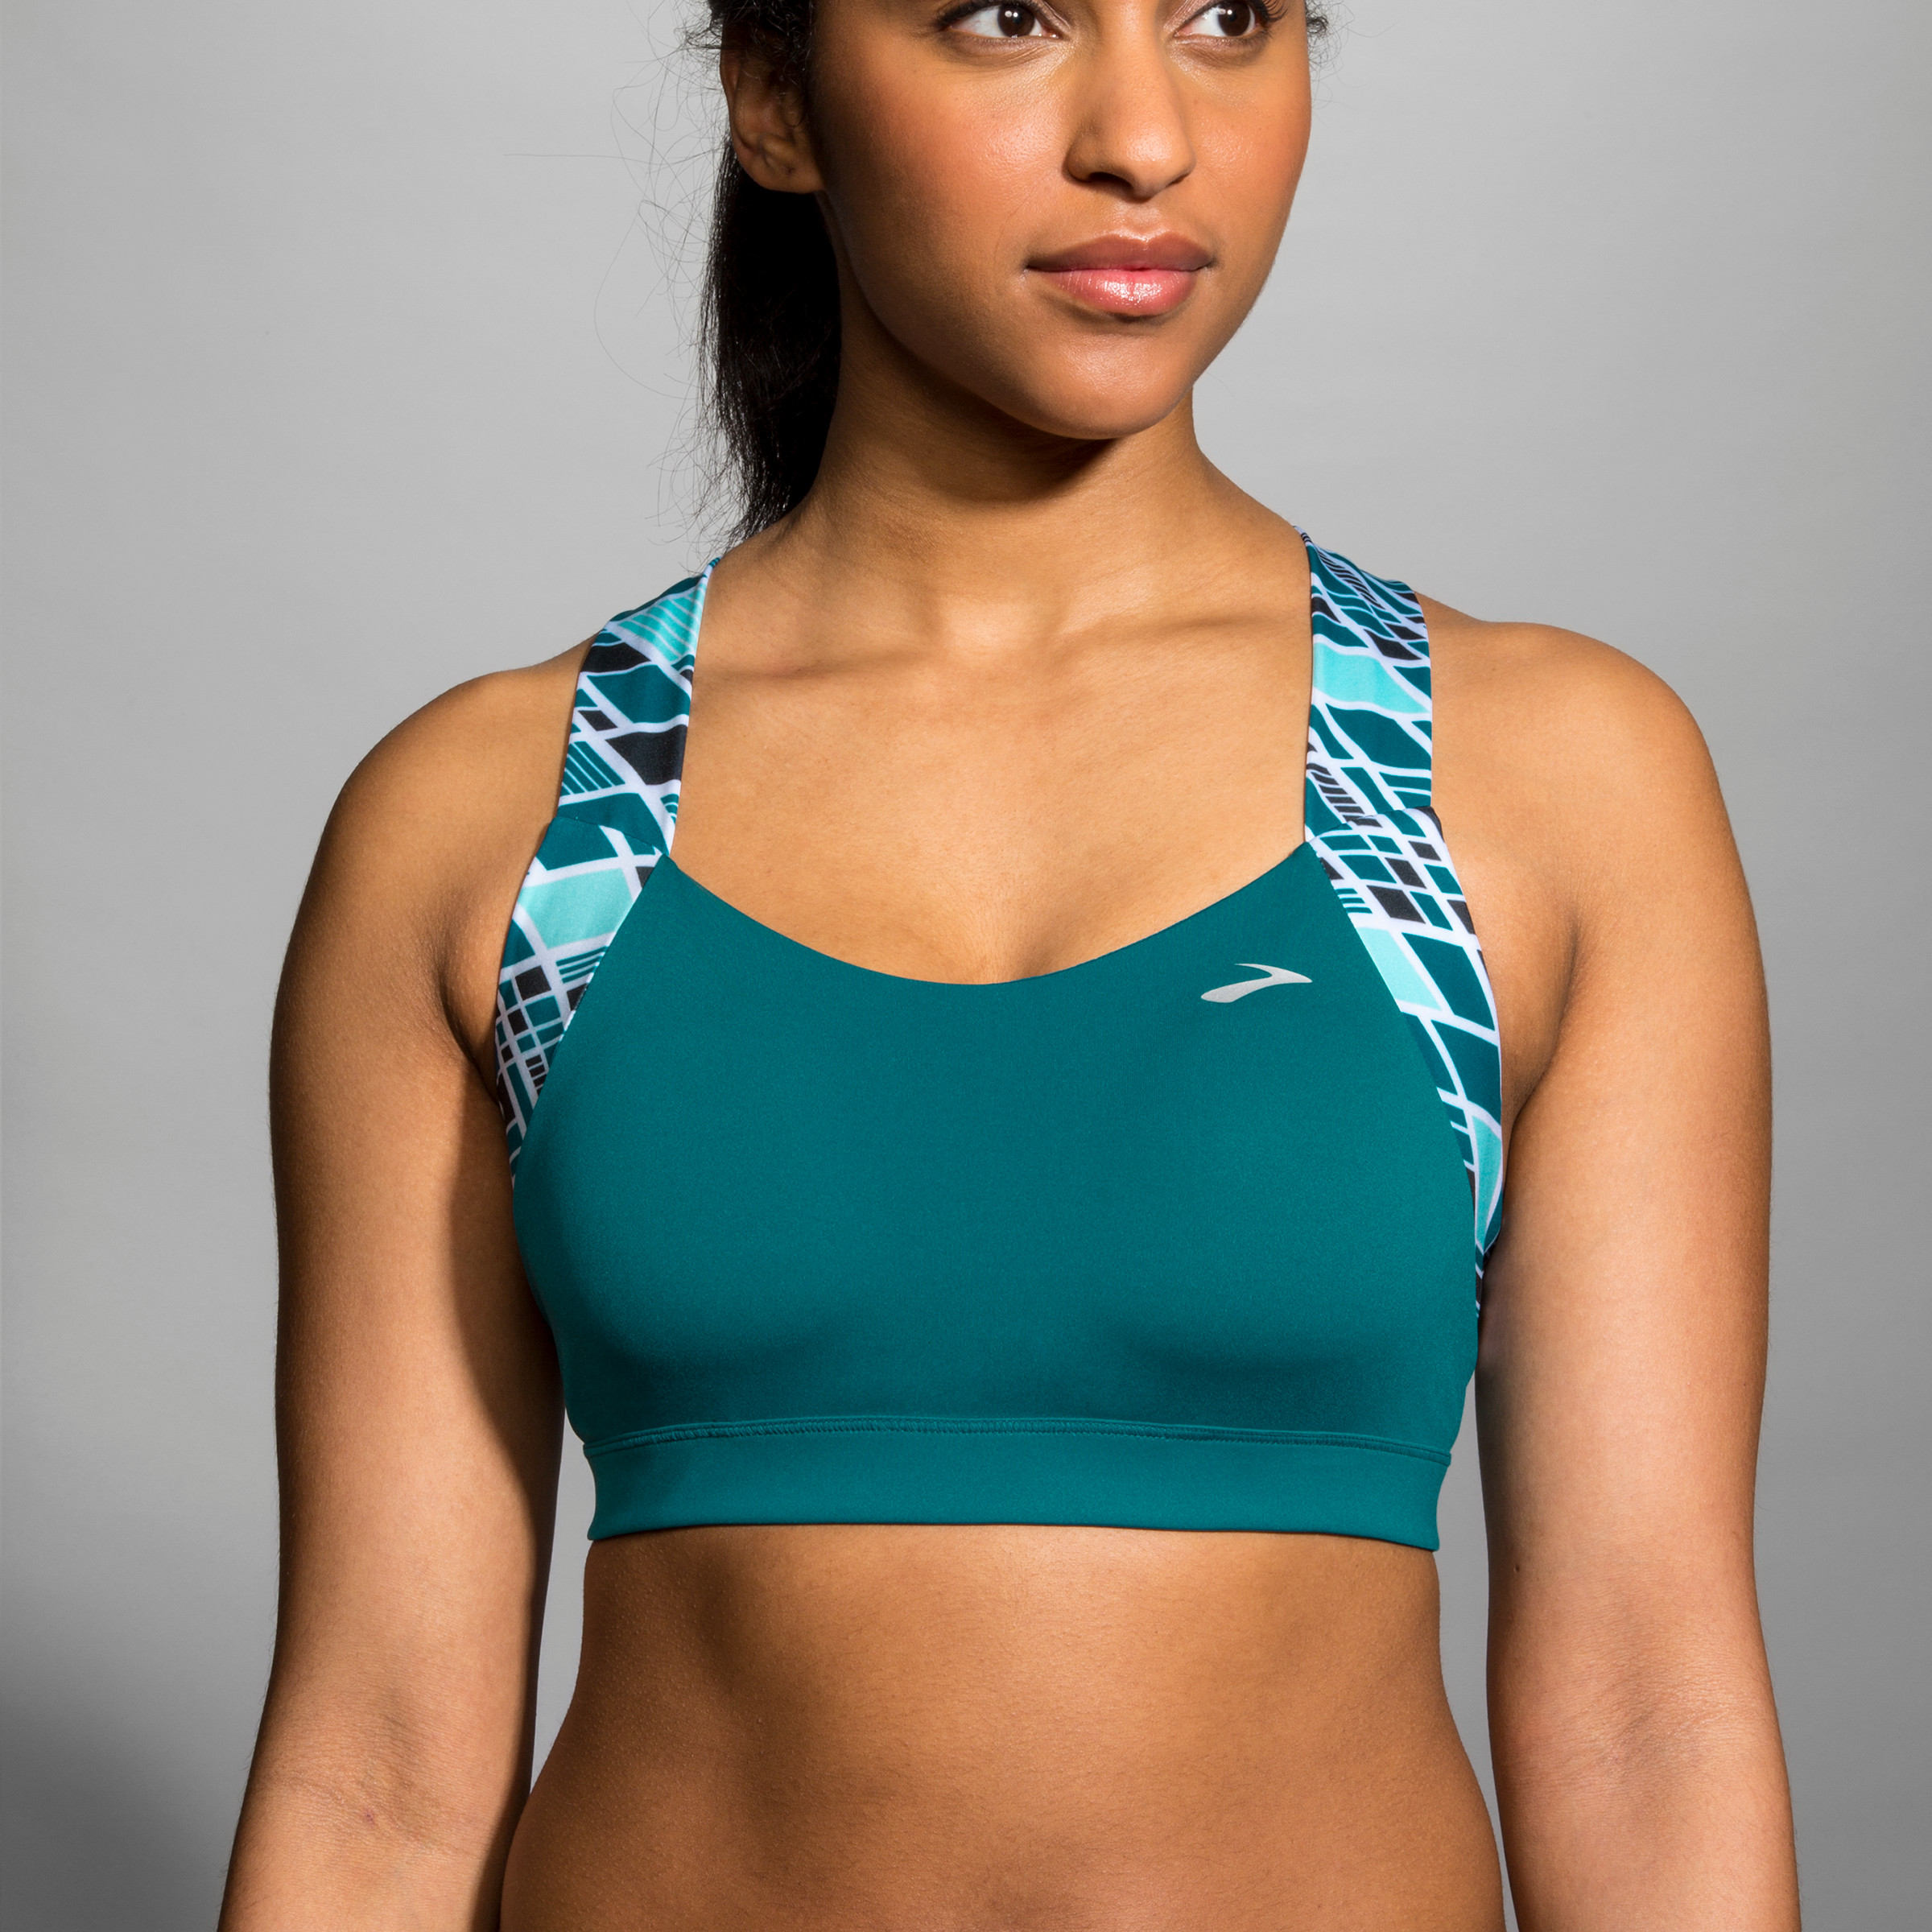 The Best Sports Bra for Runners with C to D Cups is the Brooks